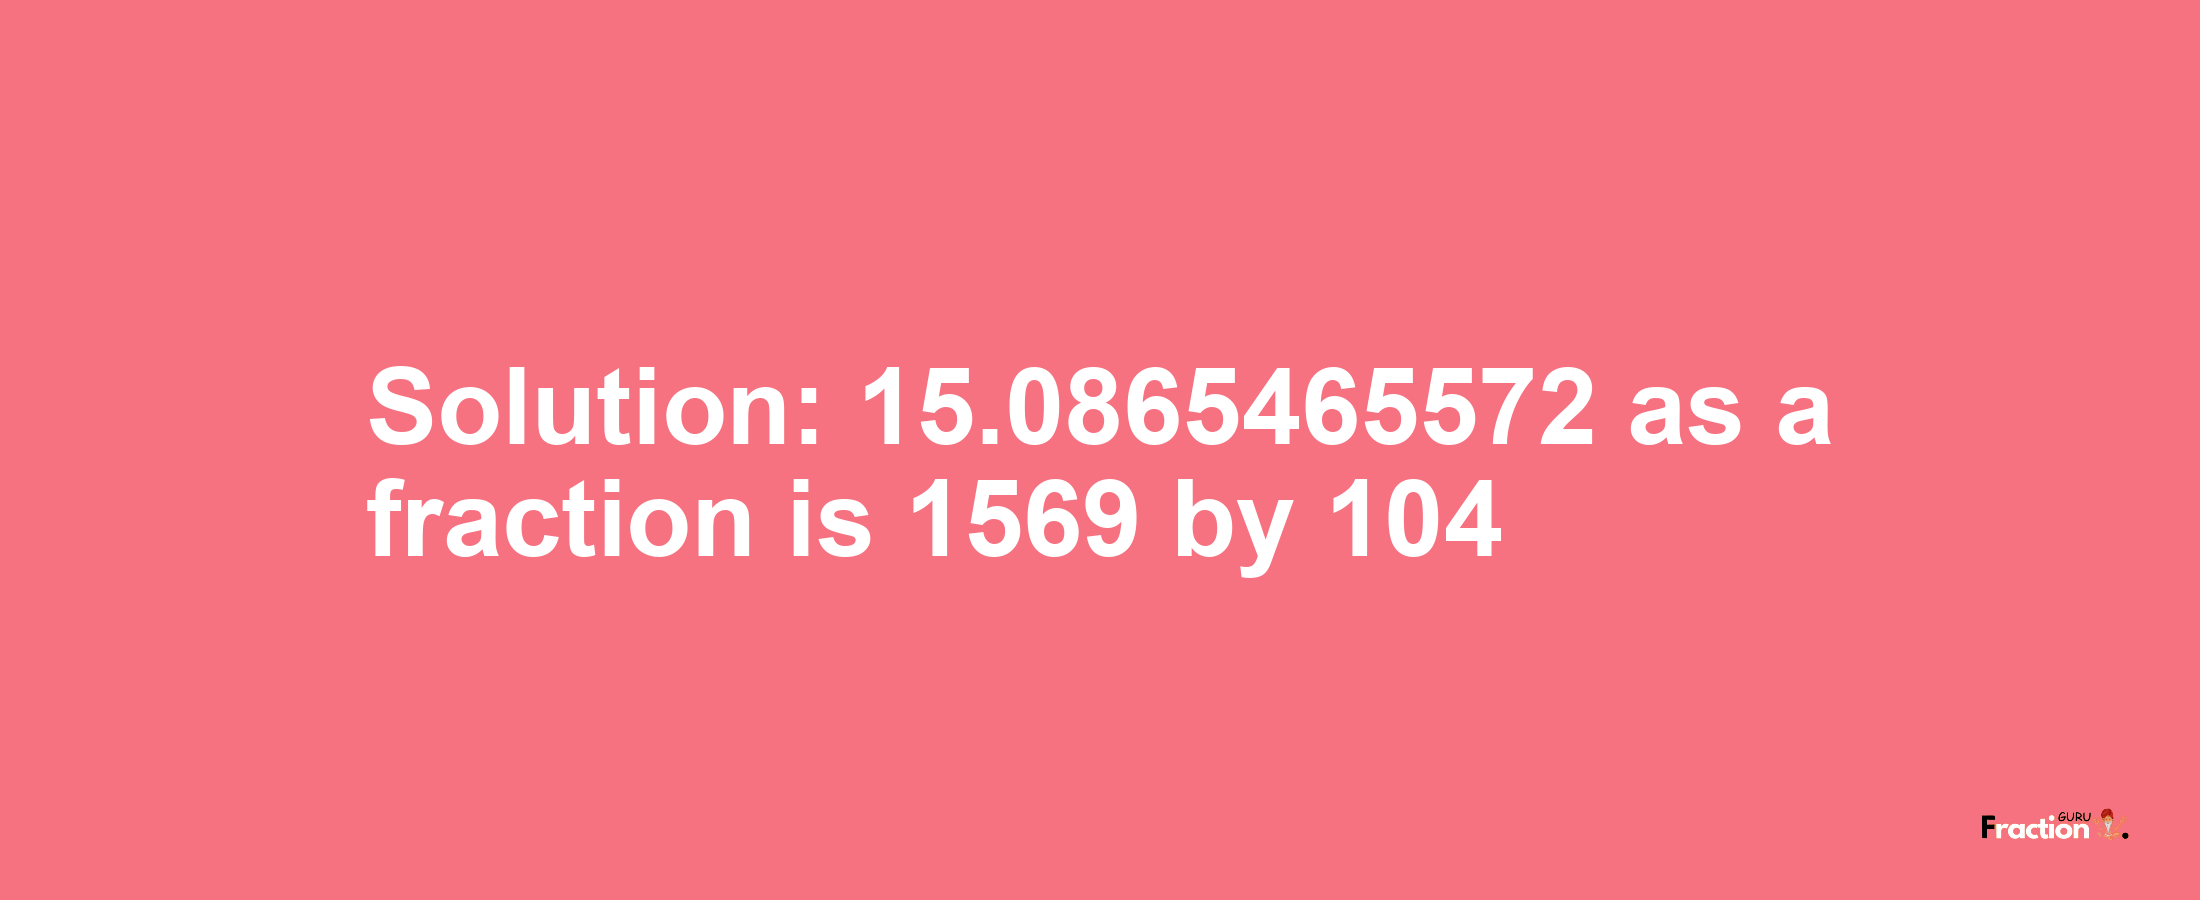 Solution:15.0865465572 as a fraction is 1569/104